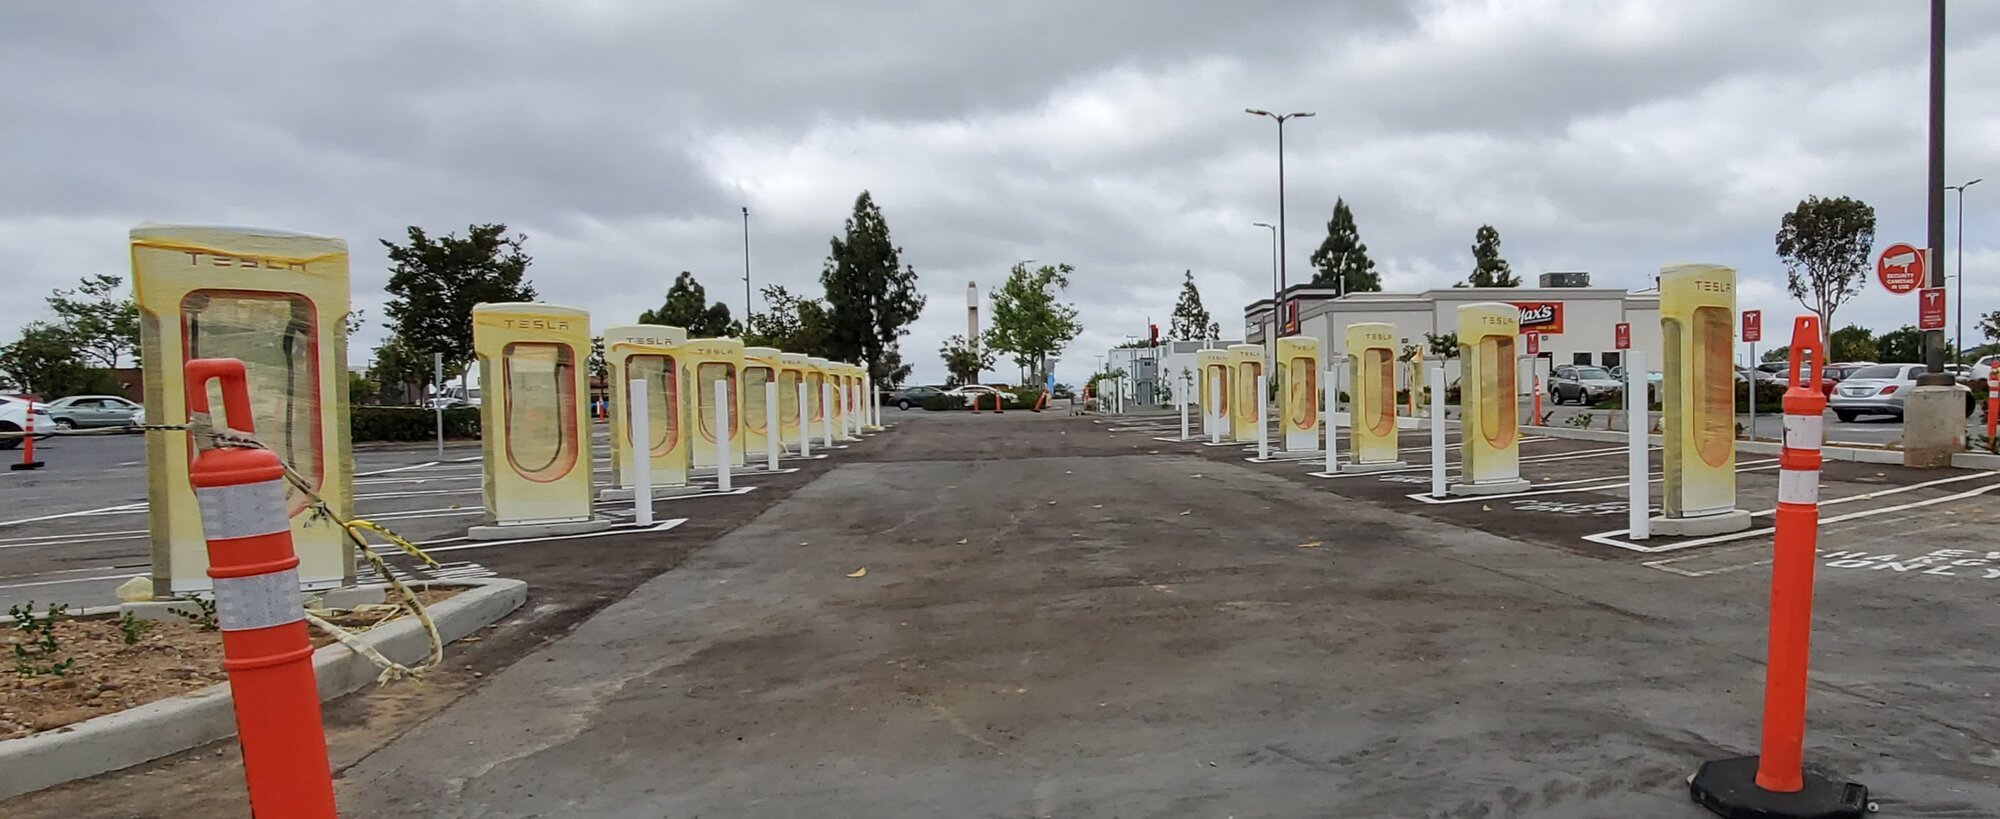 Rows of Superchargers.jpg